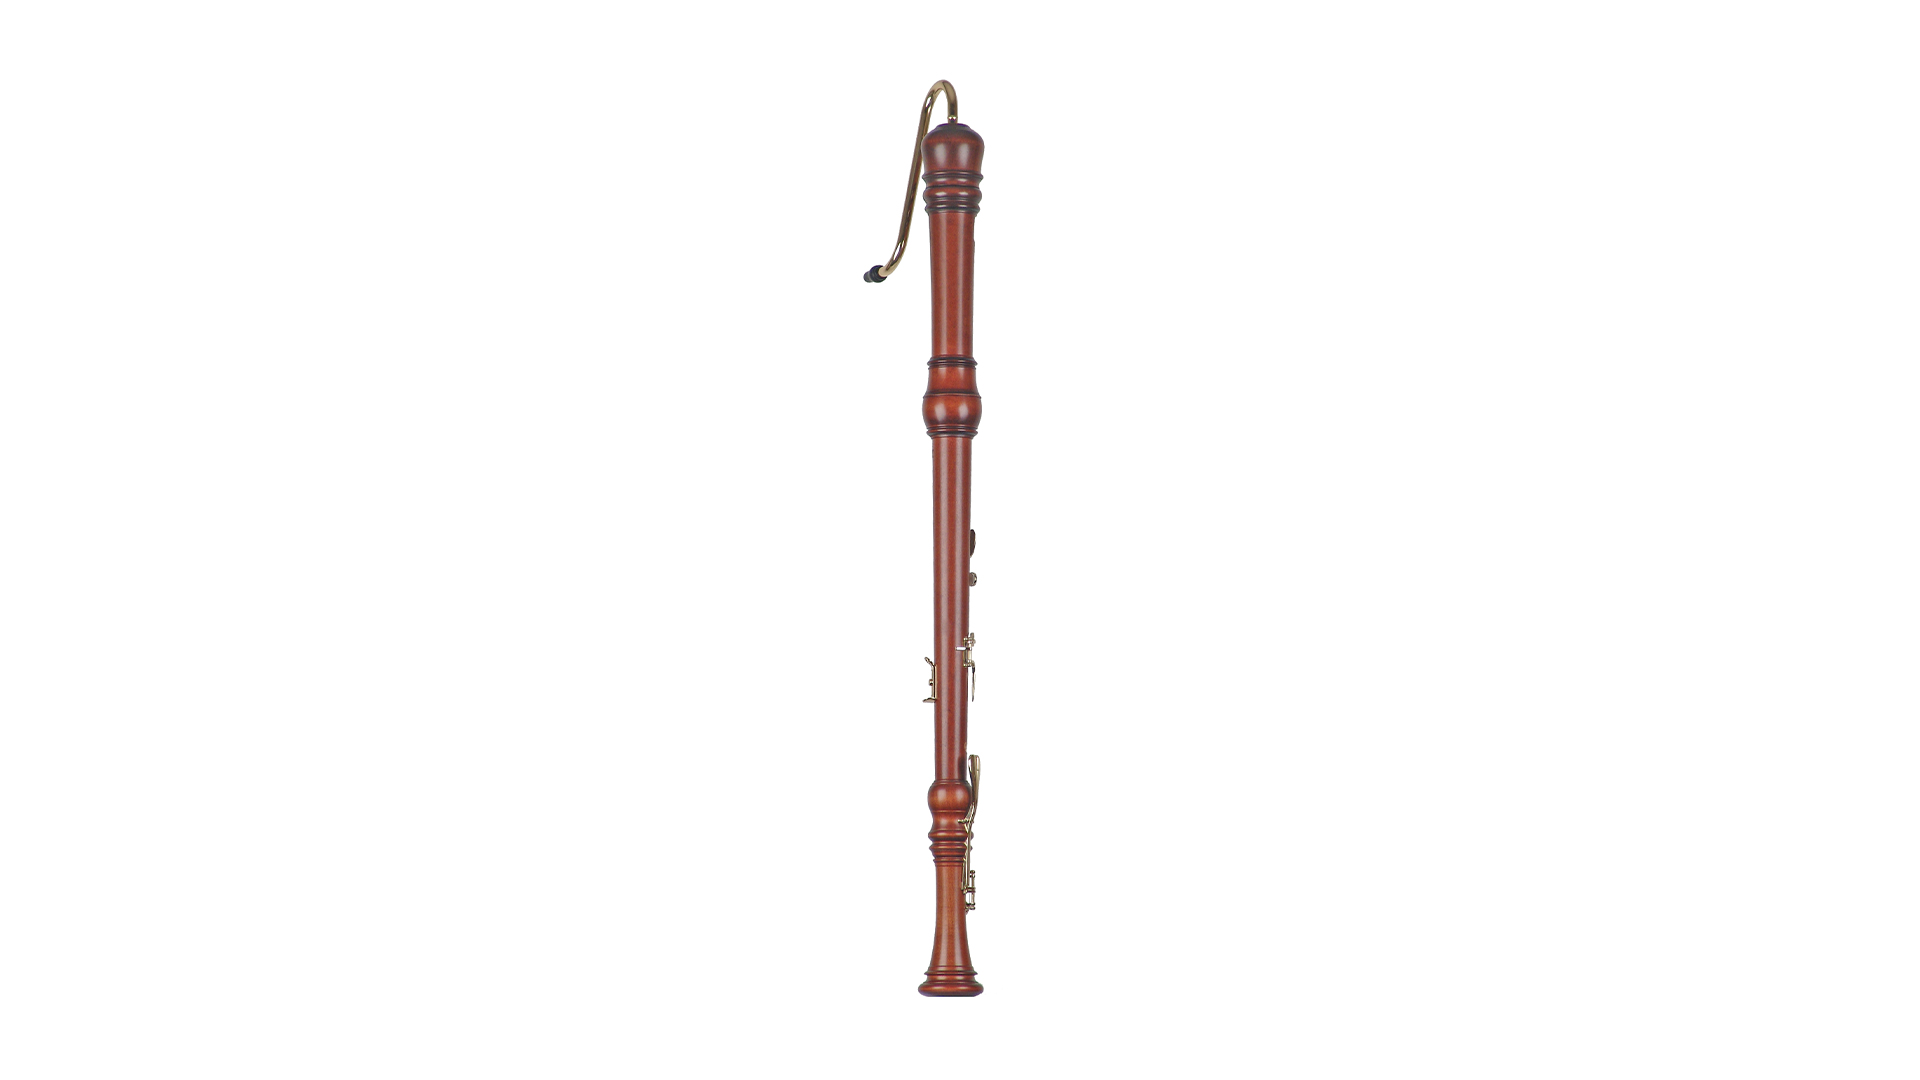 Moeck, "Rottenburgh", bass in f, baroque double hole, 442 Hz, maple stained, expandable to 415Hz